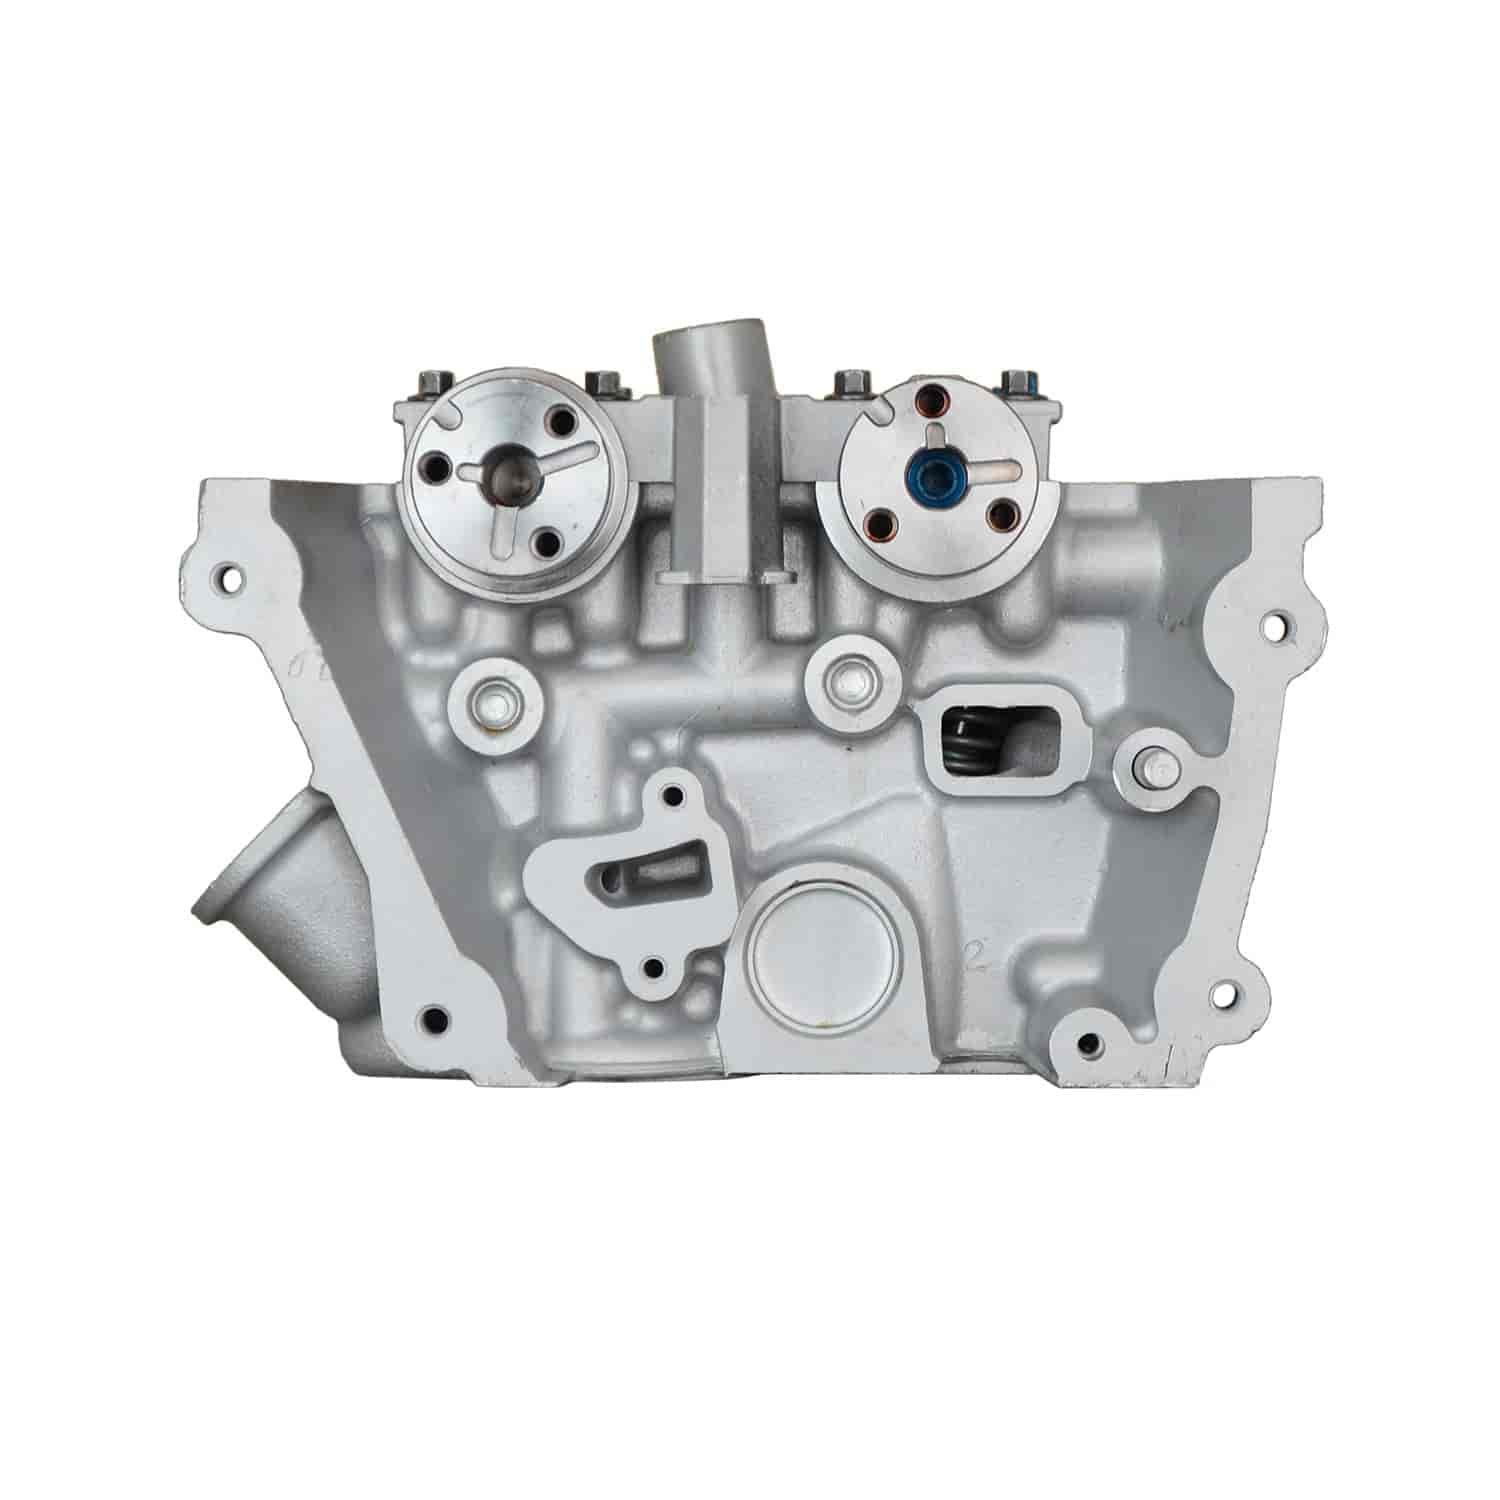 FORD 302 11-14 LEFT HEAD